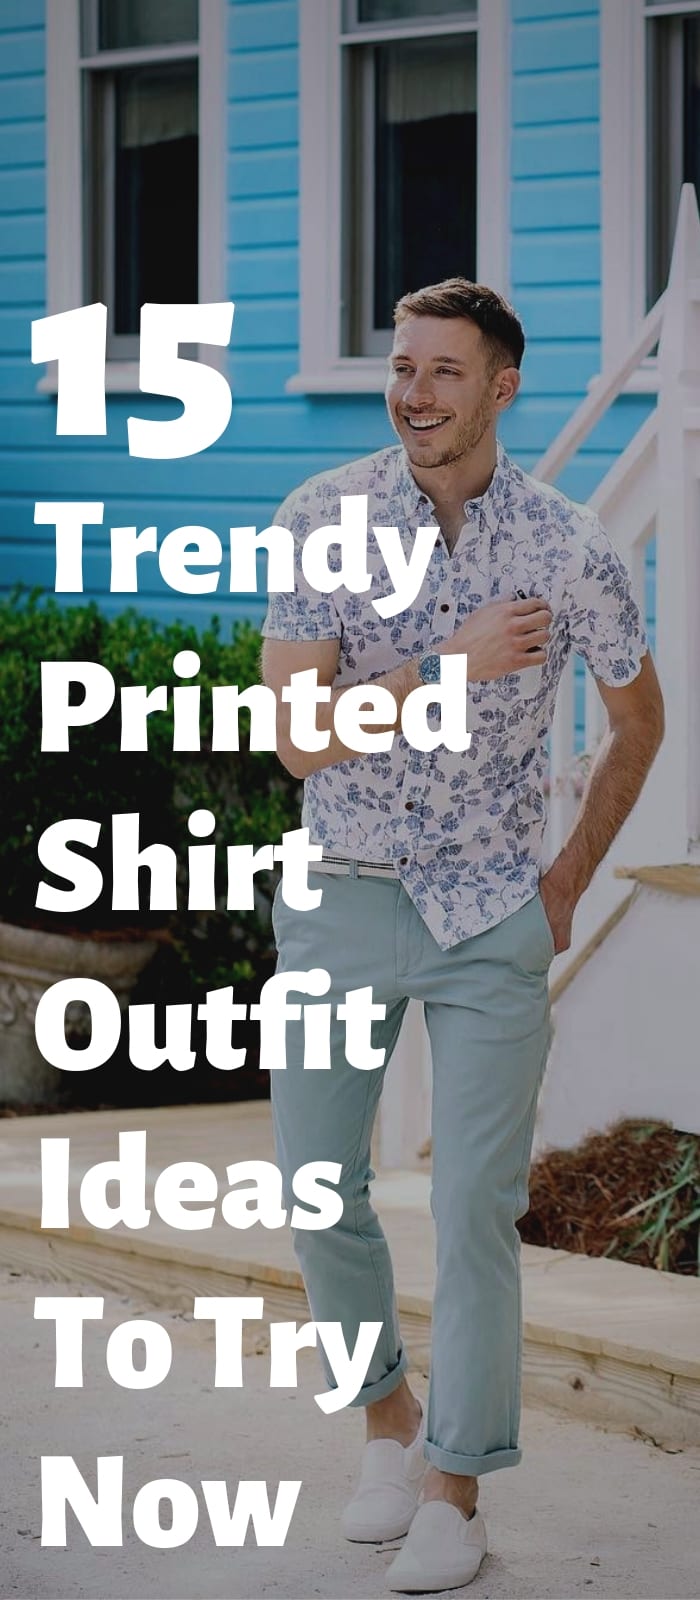 15 Trendy Printed Shirt Outfit Ideas To Try Now